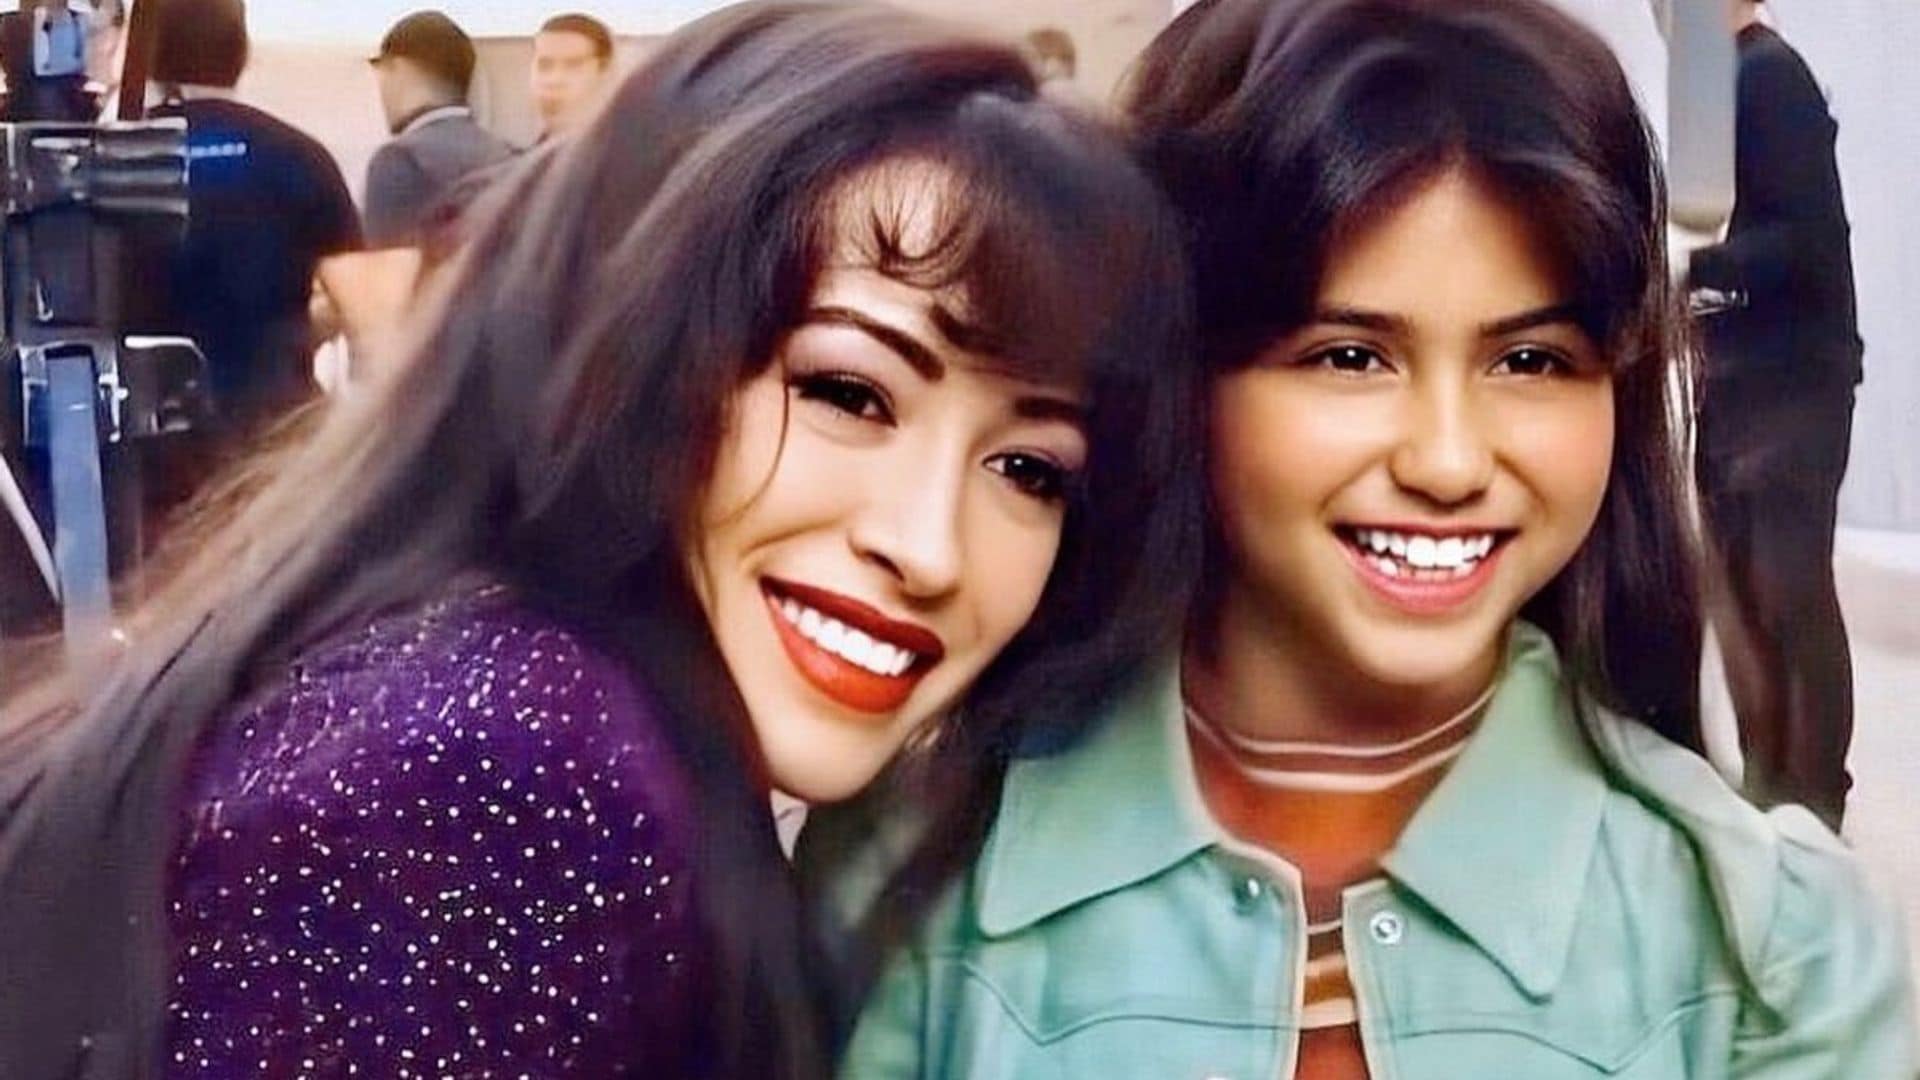 Meet the cast of the new Netflix series about Selena Quintanilla